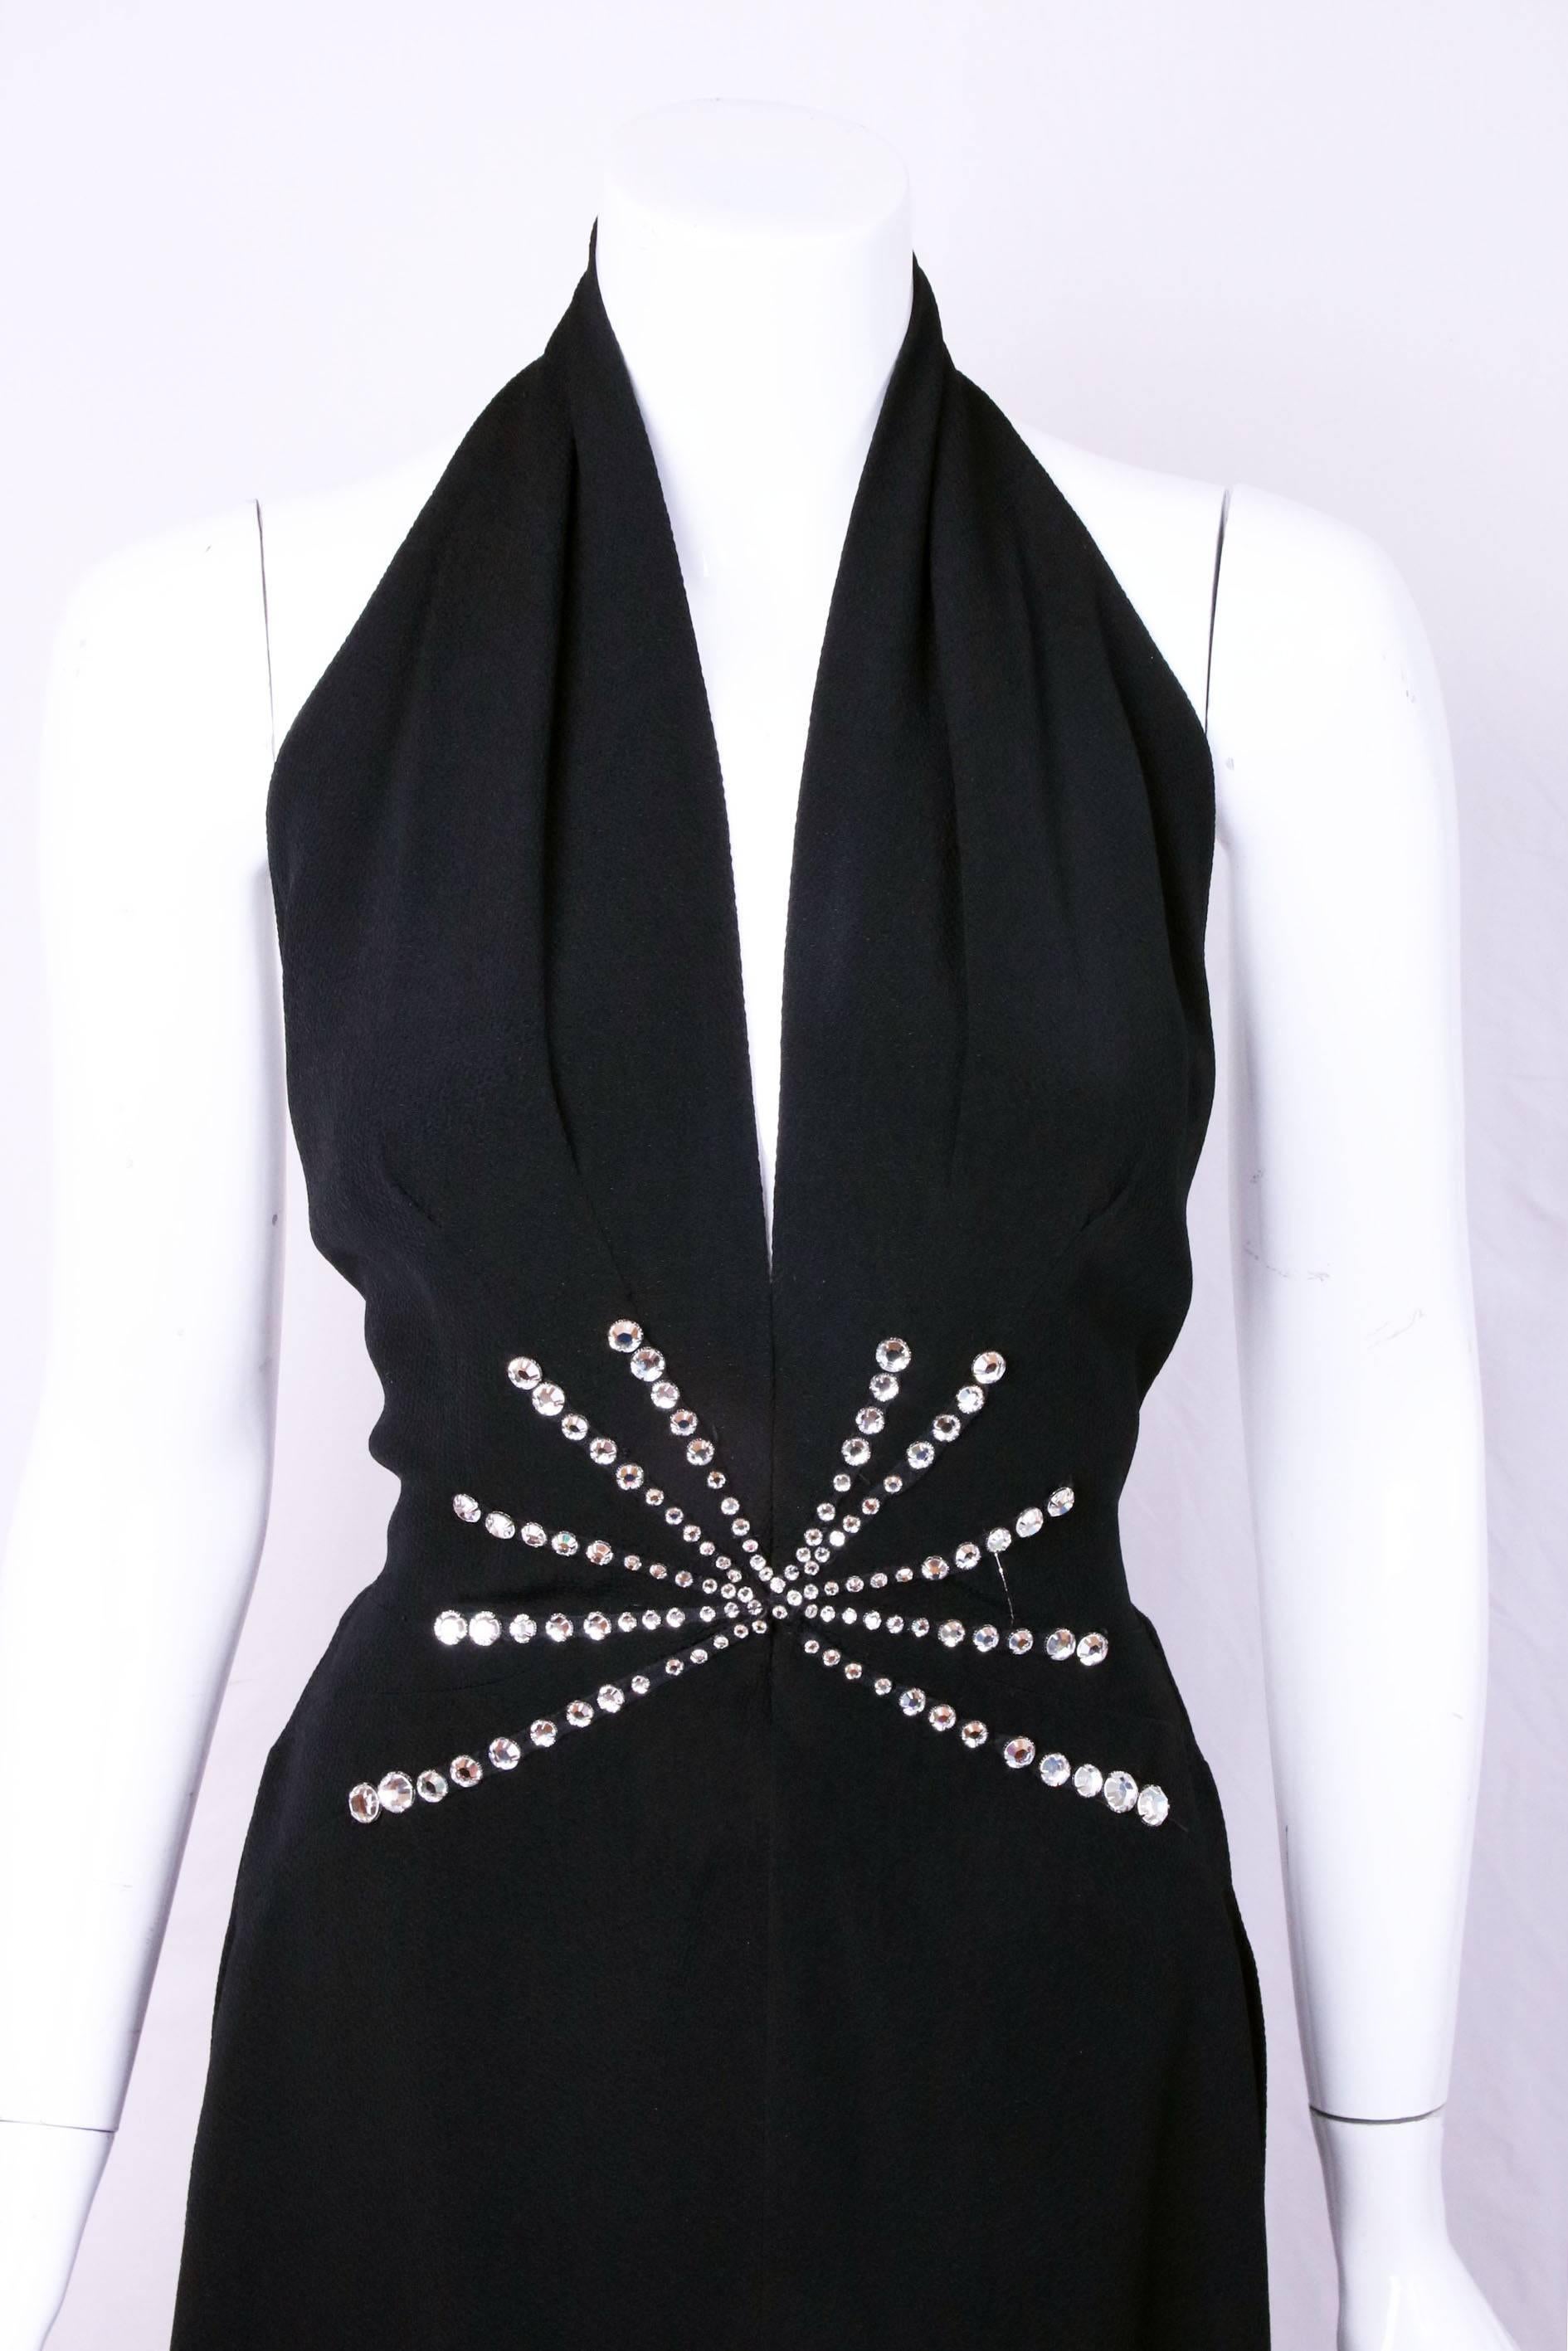 Pauline Trigere black halter neck evening gown with waterfall hem and rhinestone sunburst design. In excellent condition. No size tag so please consult measurements. 
MEASUREMENTS:
Waist - 25